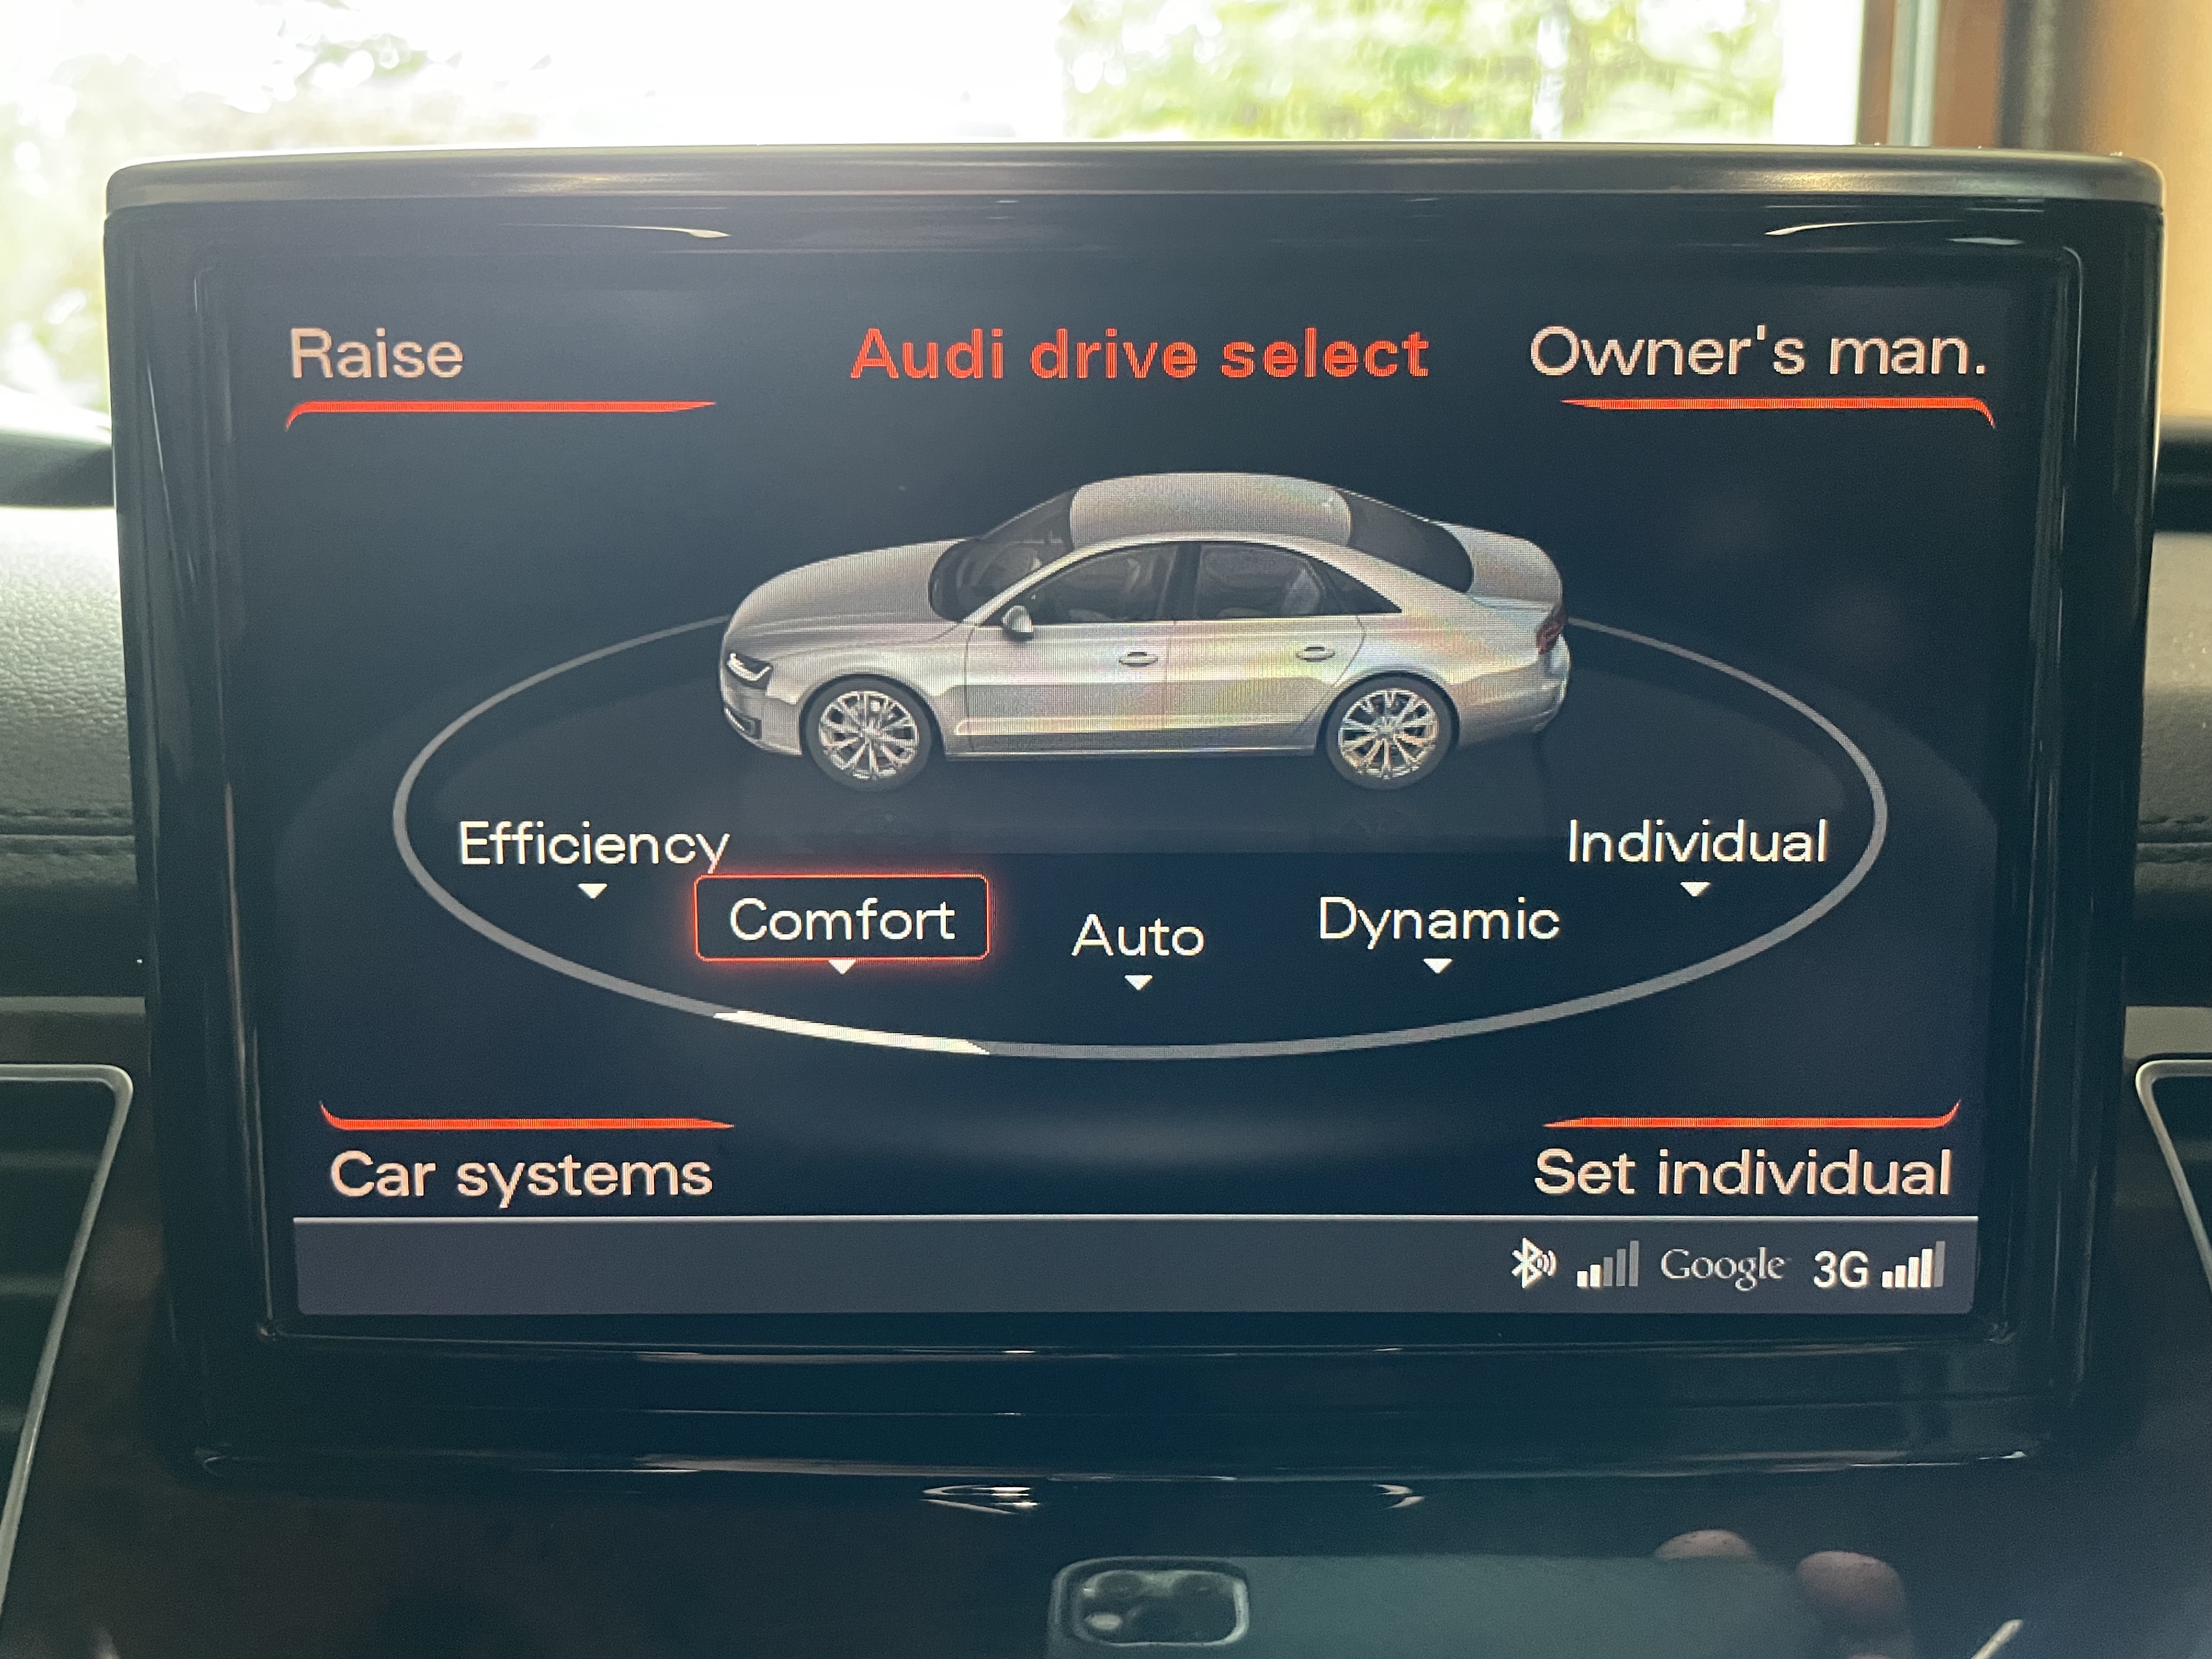 EVERY VW & AUDI OWNER SHOULD HAVE THIS! VCDS Showcase - At The Wheel 